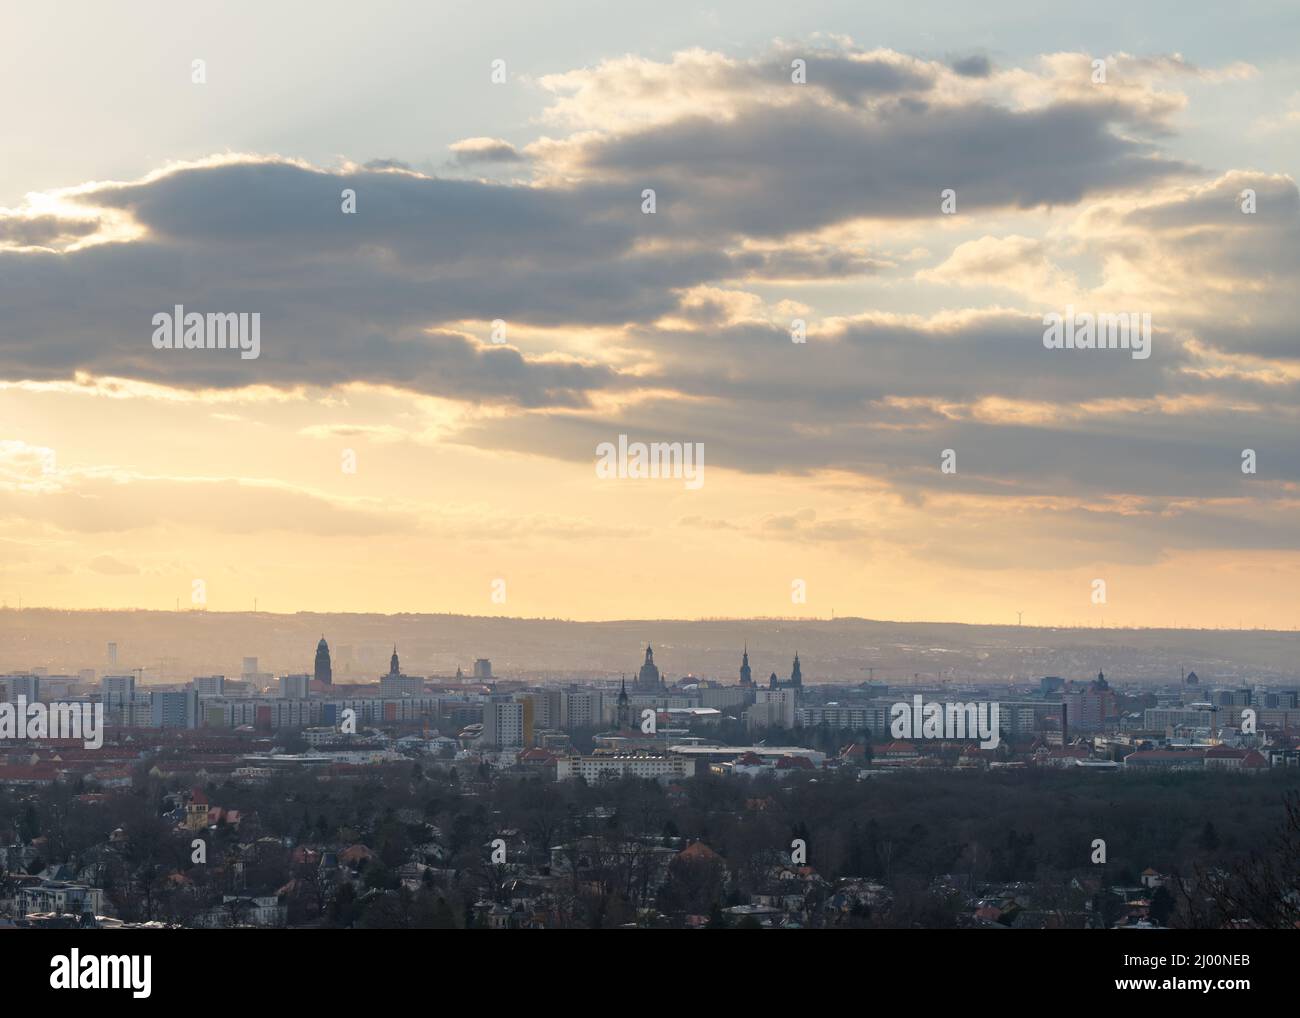 City of Dresden, view from the district Loschwitz in southwest direction to the city centre, where the numerous towers form a silhouette in the light Stock Photo